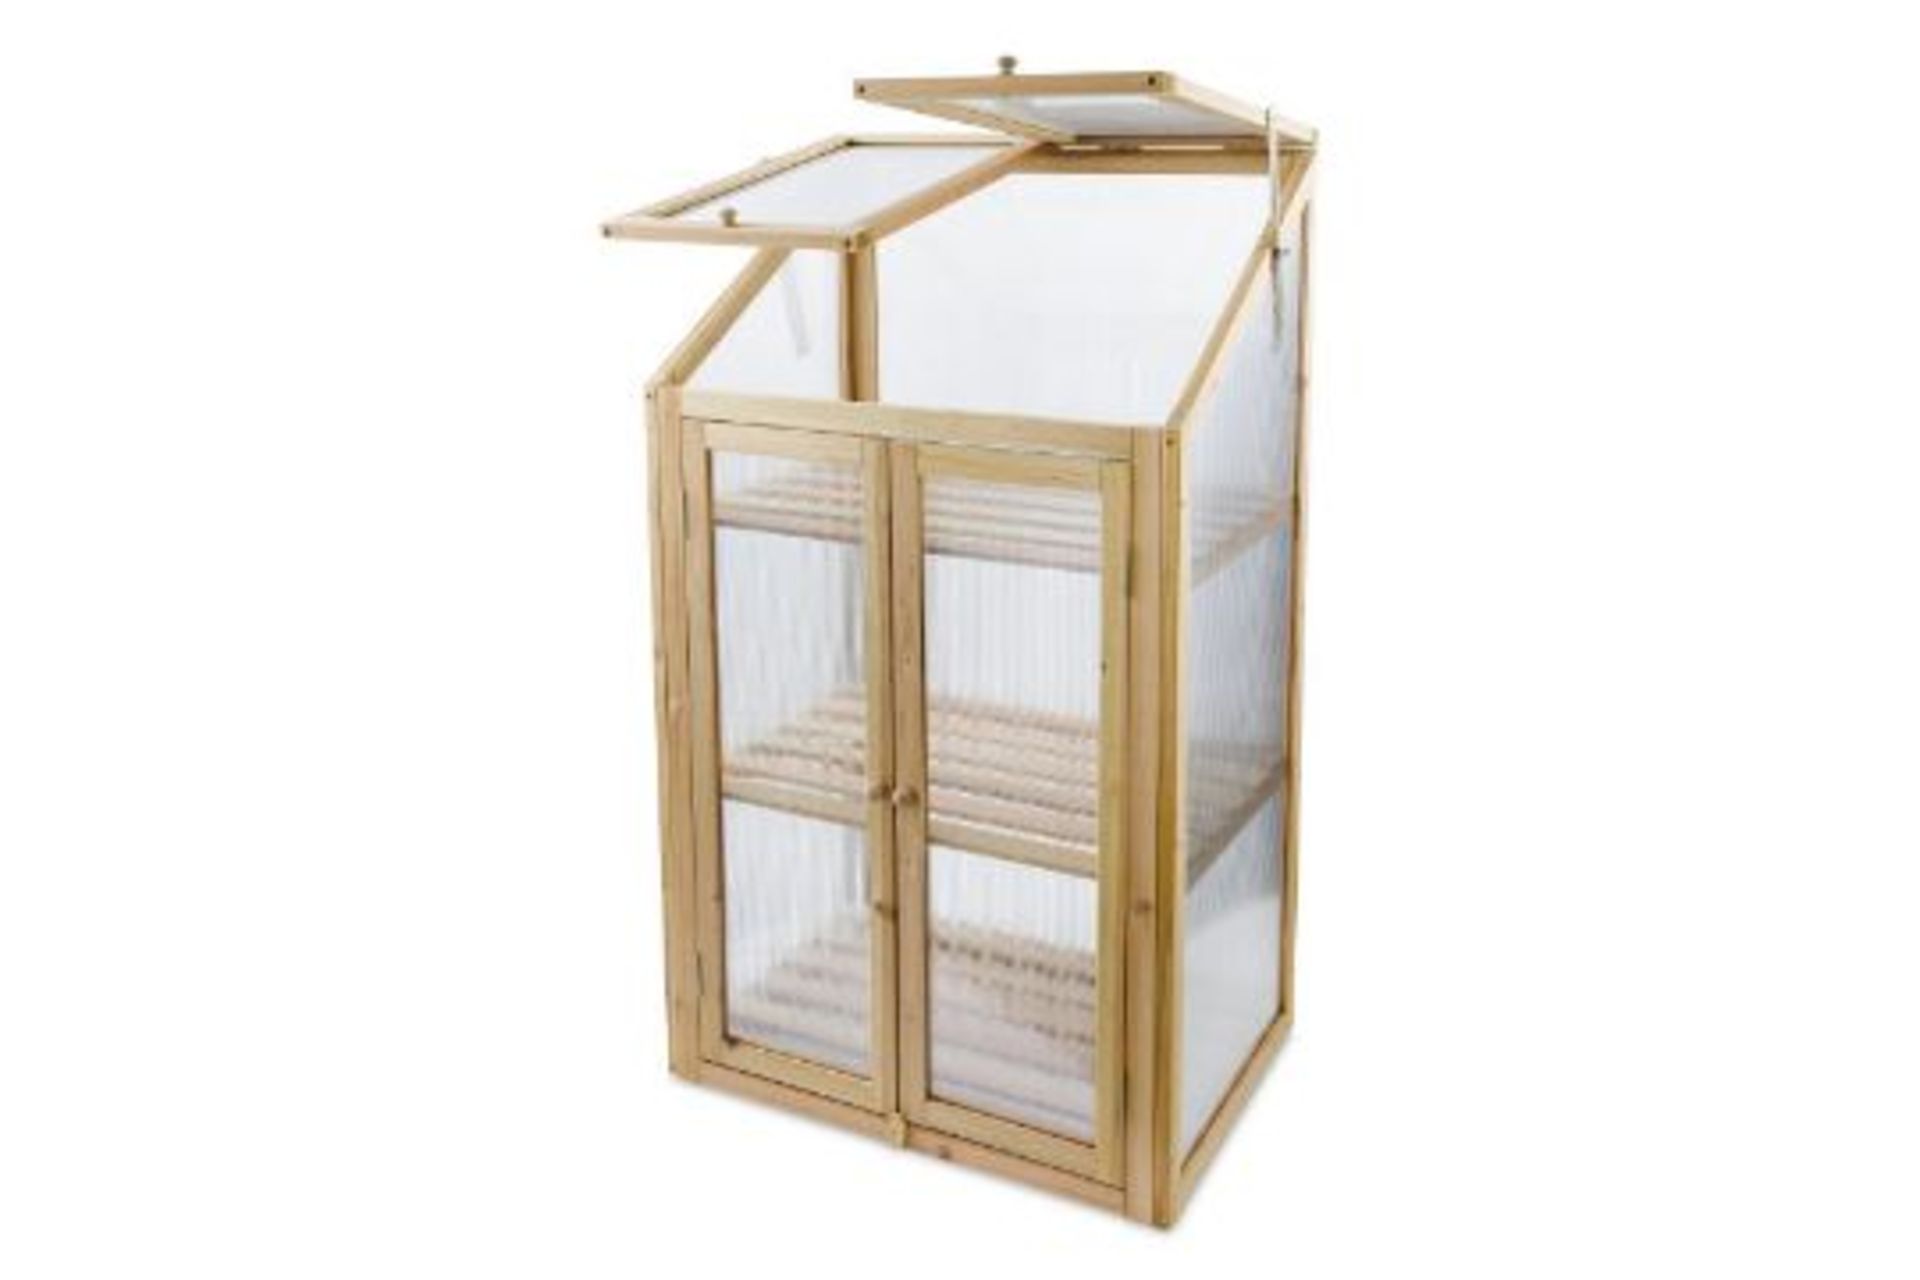 Natural Wooden Mini Greenhouse. Made from 100% sustainable fir wood, this Natural Wooden Mini - Image 2 of 3